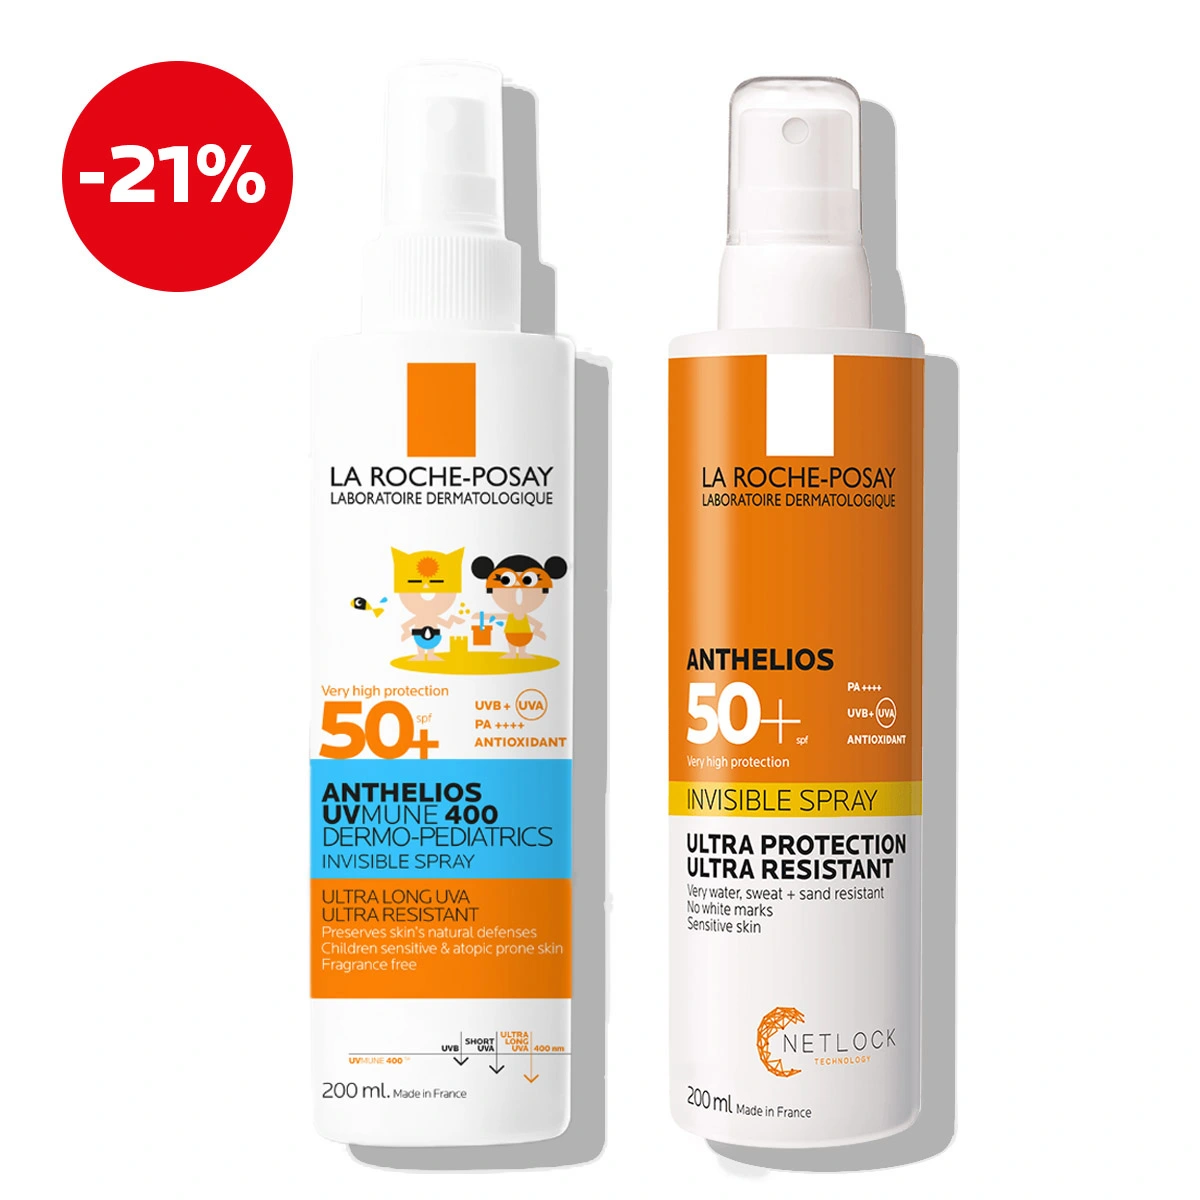 La Roche-Posay ANTHELIOS Sun-protection duo for whole family - kids and adults (sun protection) (1)-1